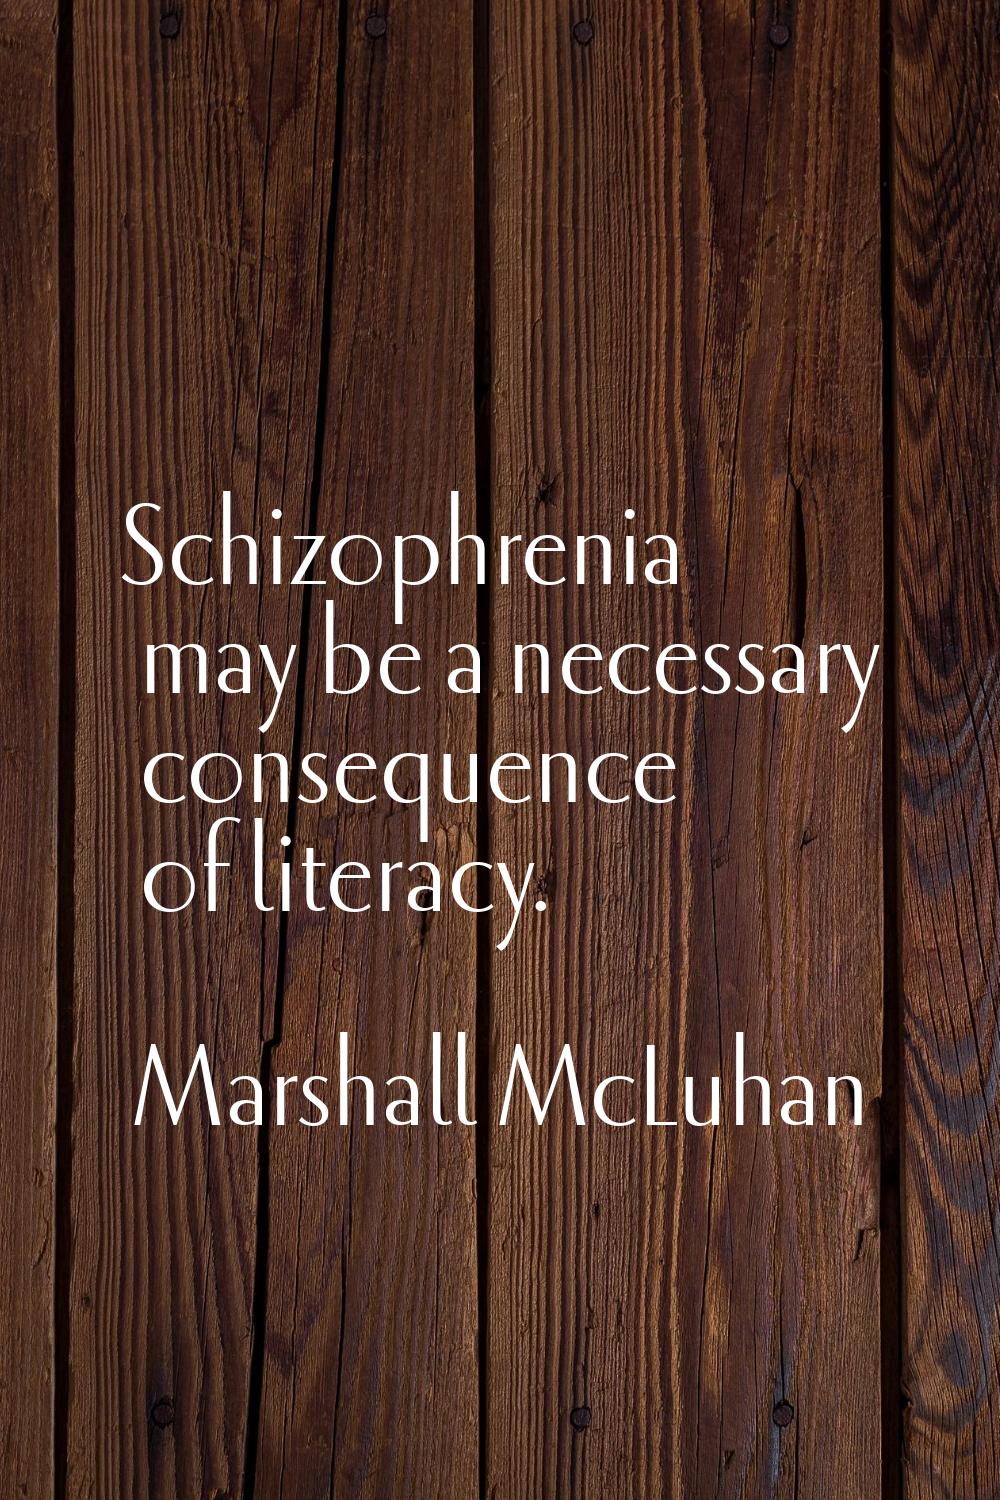 Schizophrenia may be a necessary consequence of literacy.